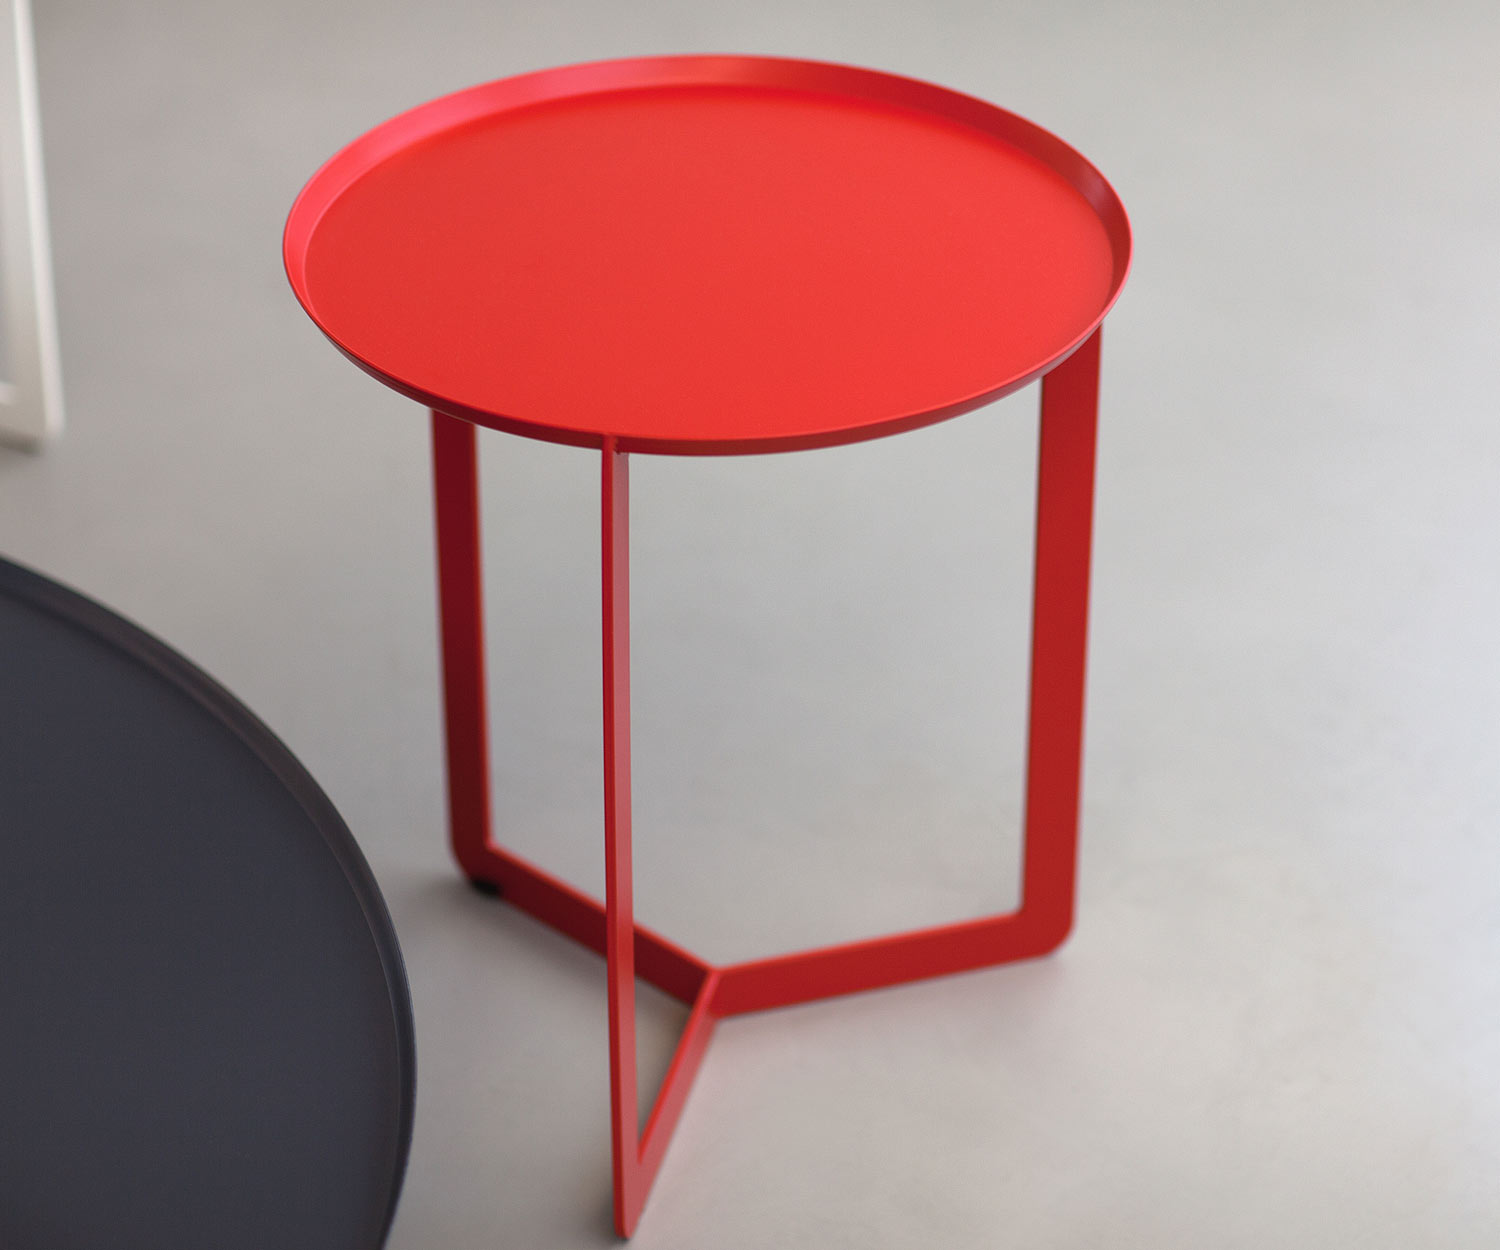 Exclusive MEME Design Round 1 side table in red